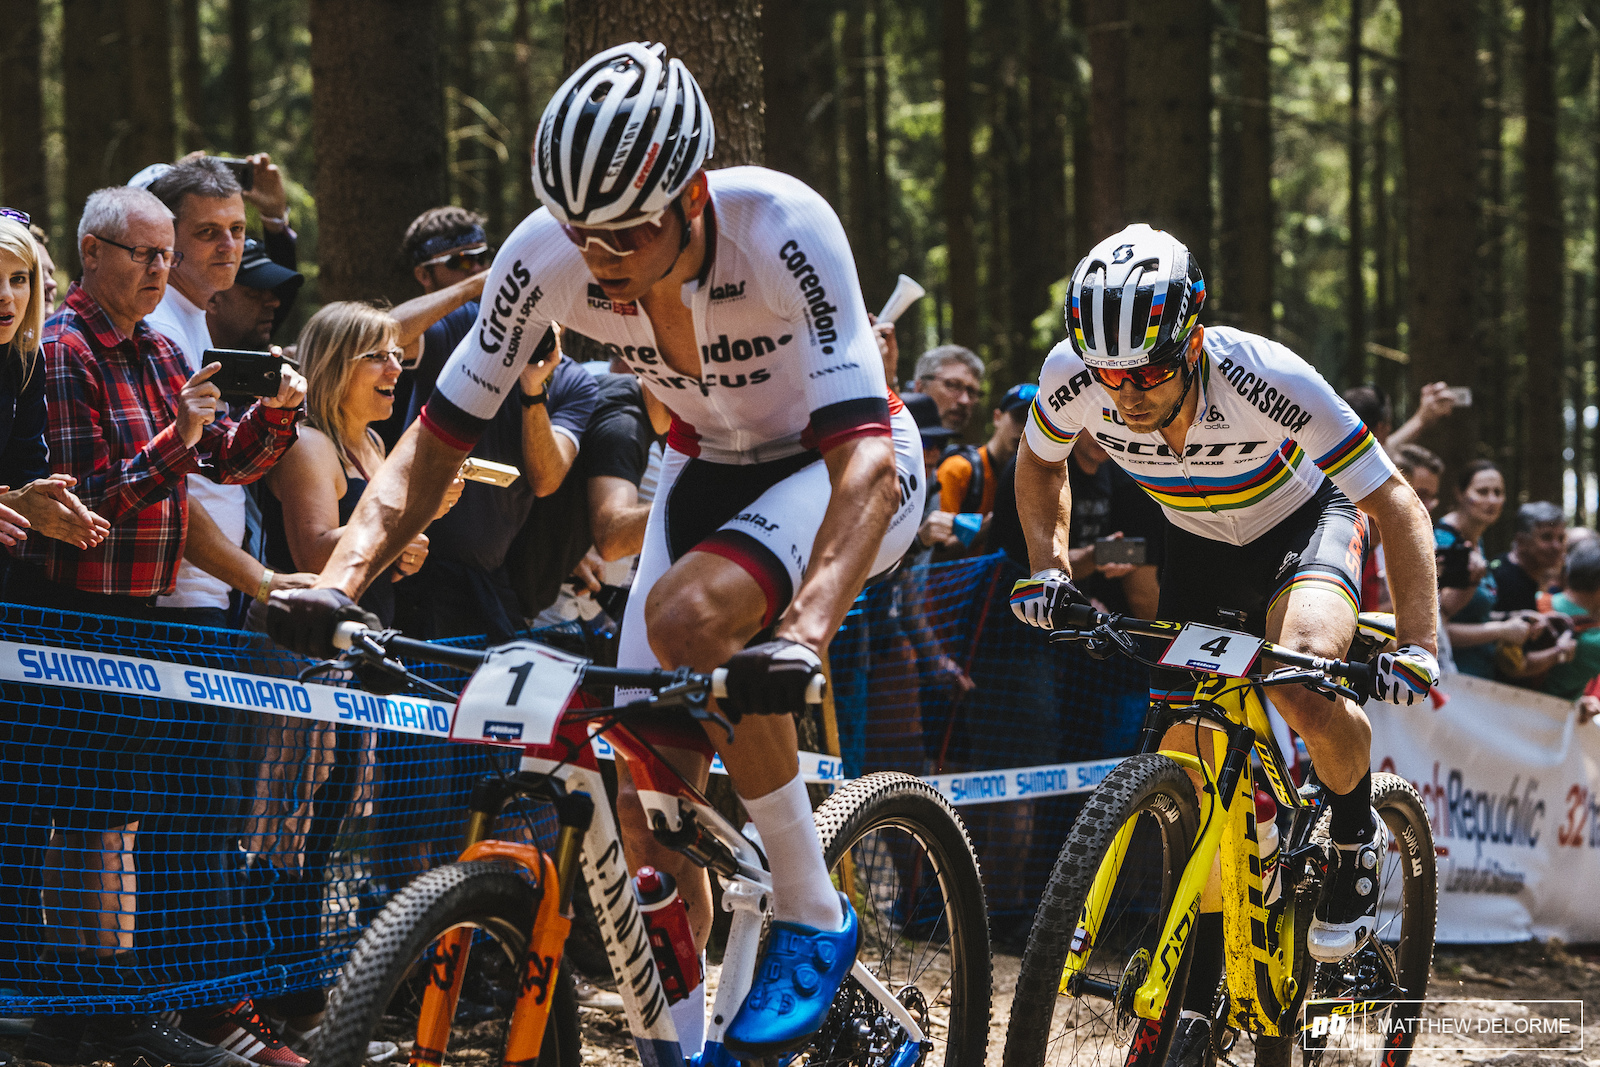 The back and forth between Schurter and MVDP was one for the books.